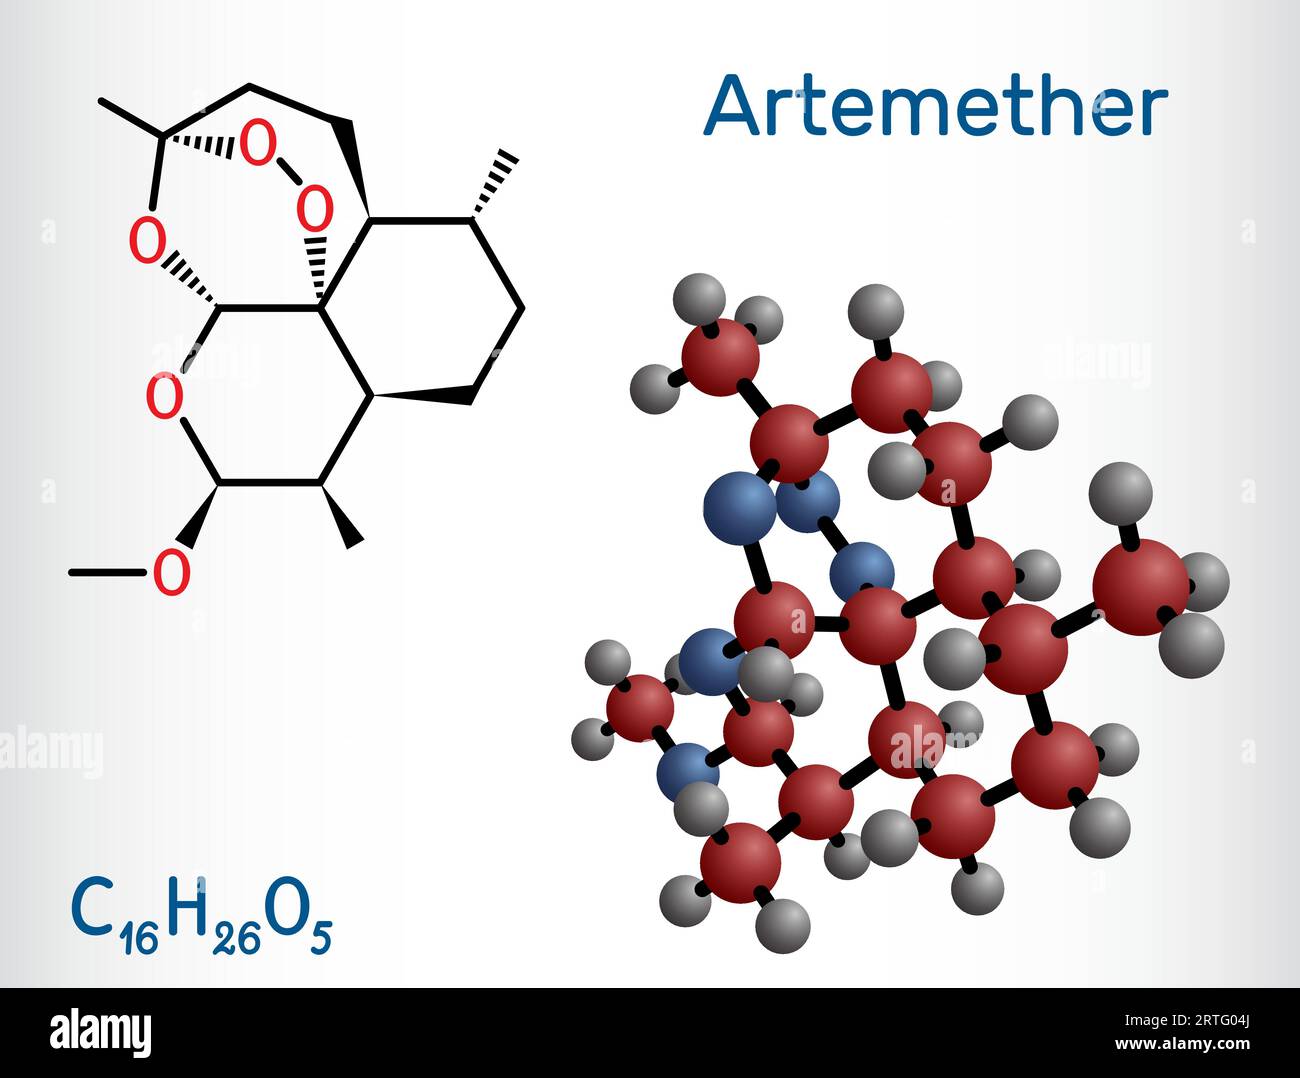 Artemether molecule. It is used for the treatment of malaria. Structural chemical formula and molecule model. Vector illustration Stock Vector